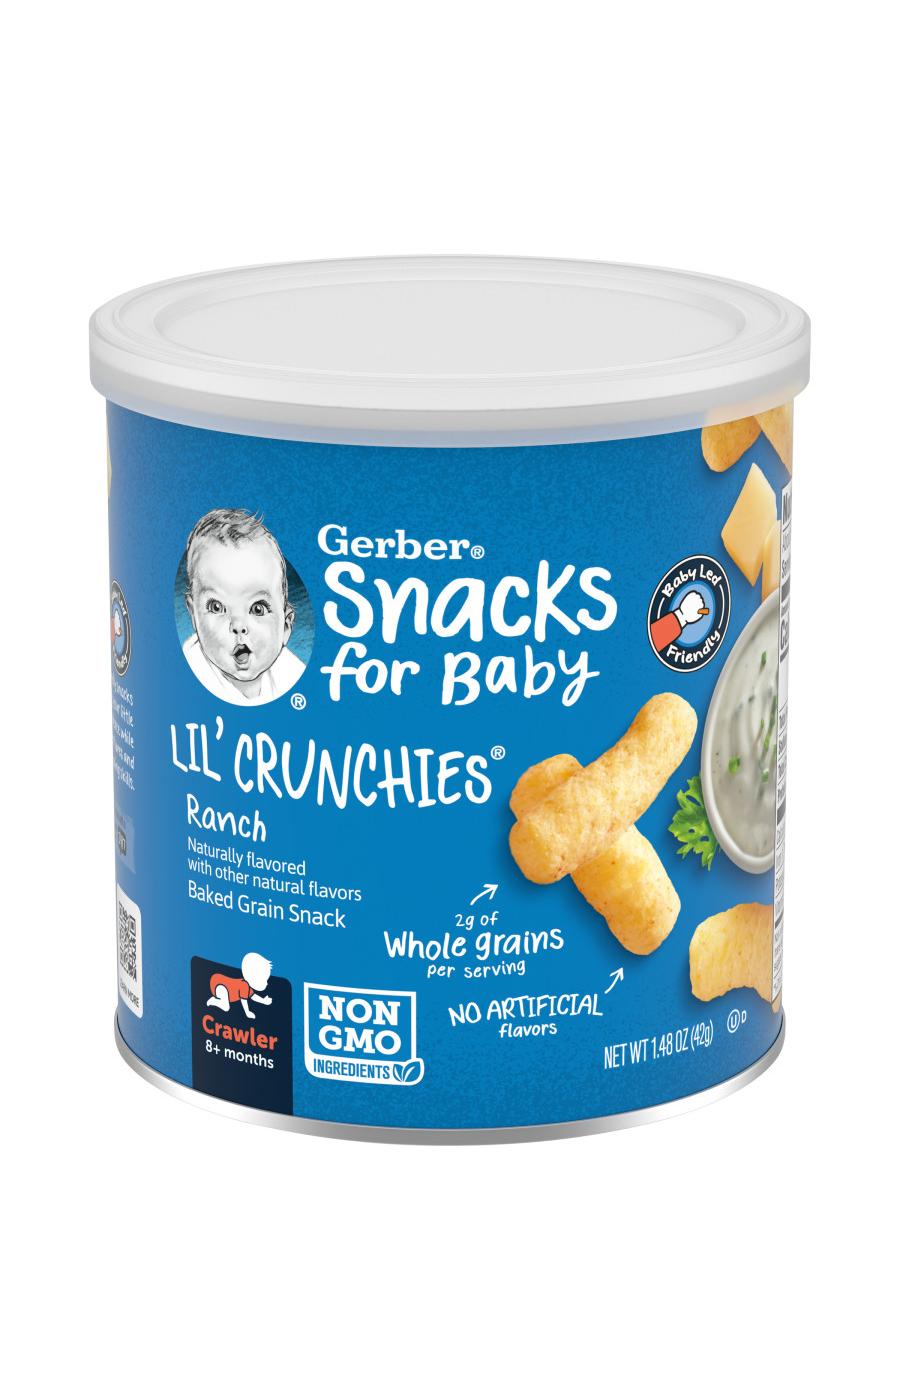 Gerber Snacks for Baby Lil' Crunchies - Ranch; image 1 of 8